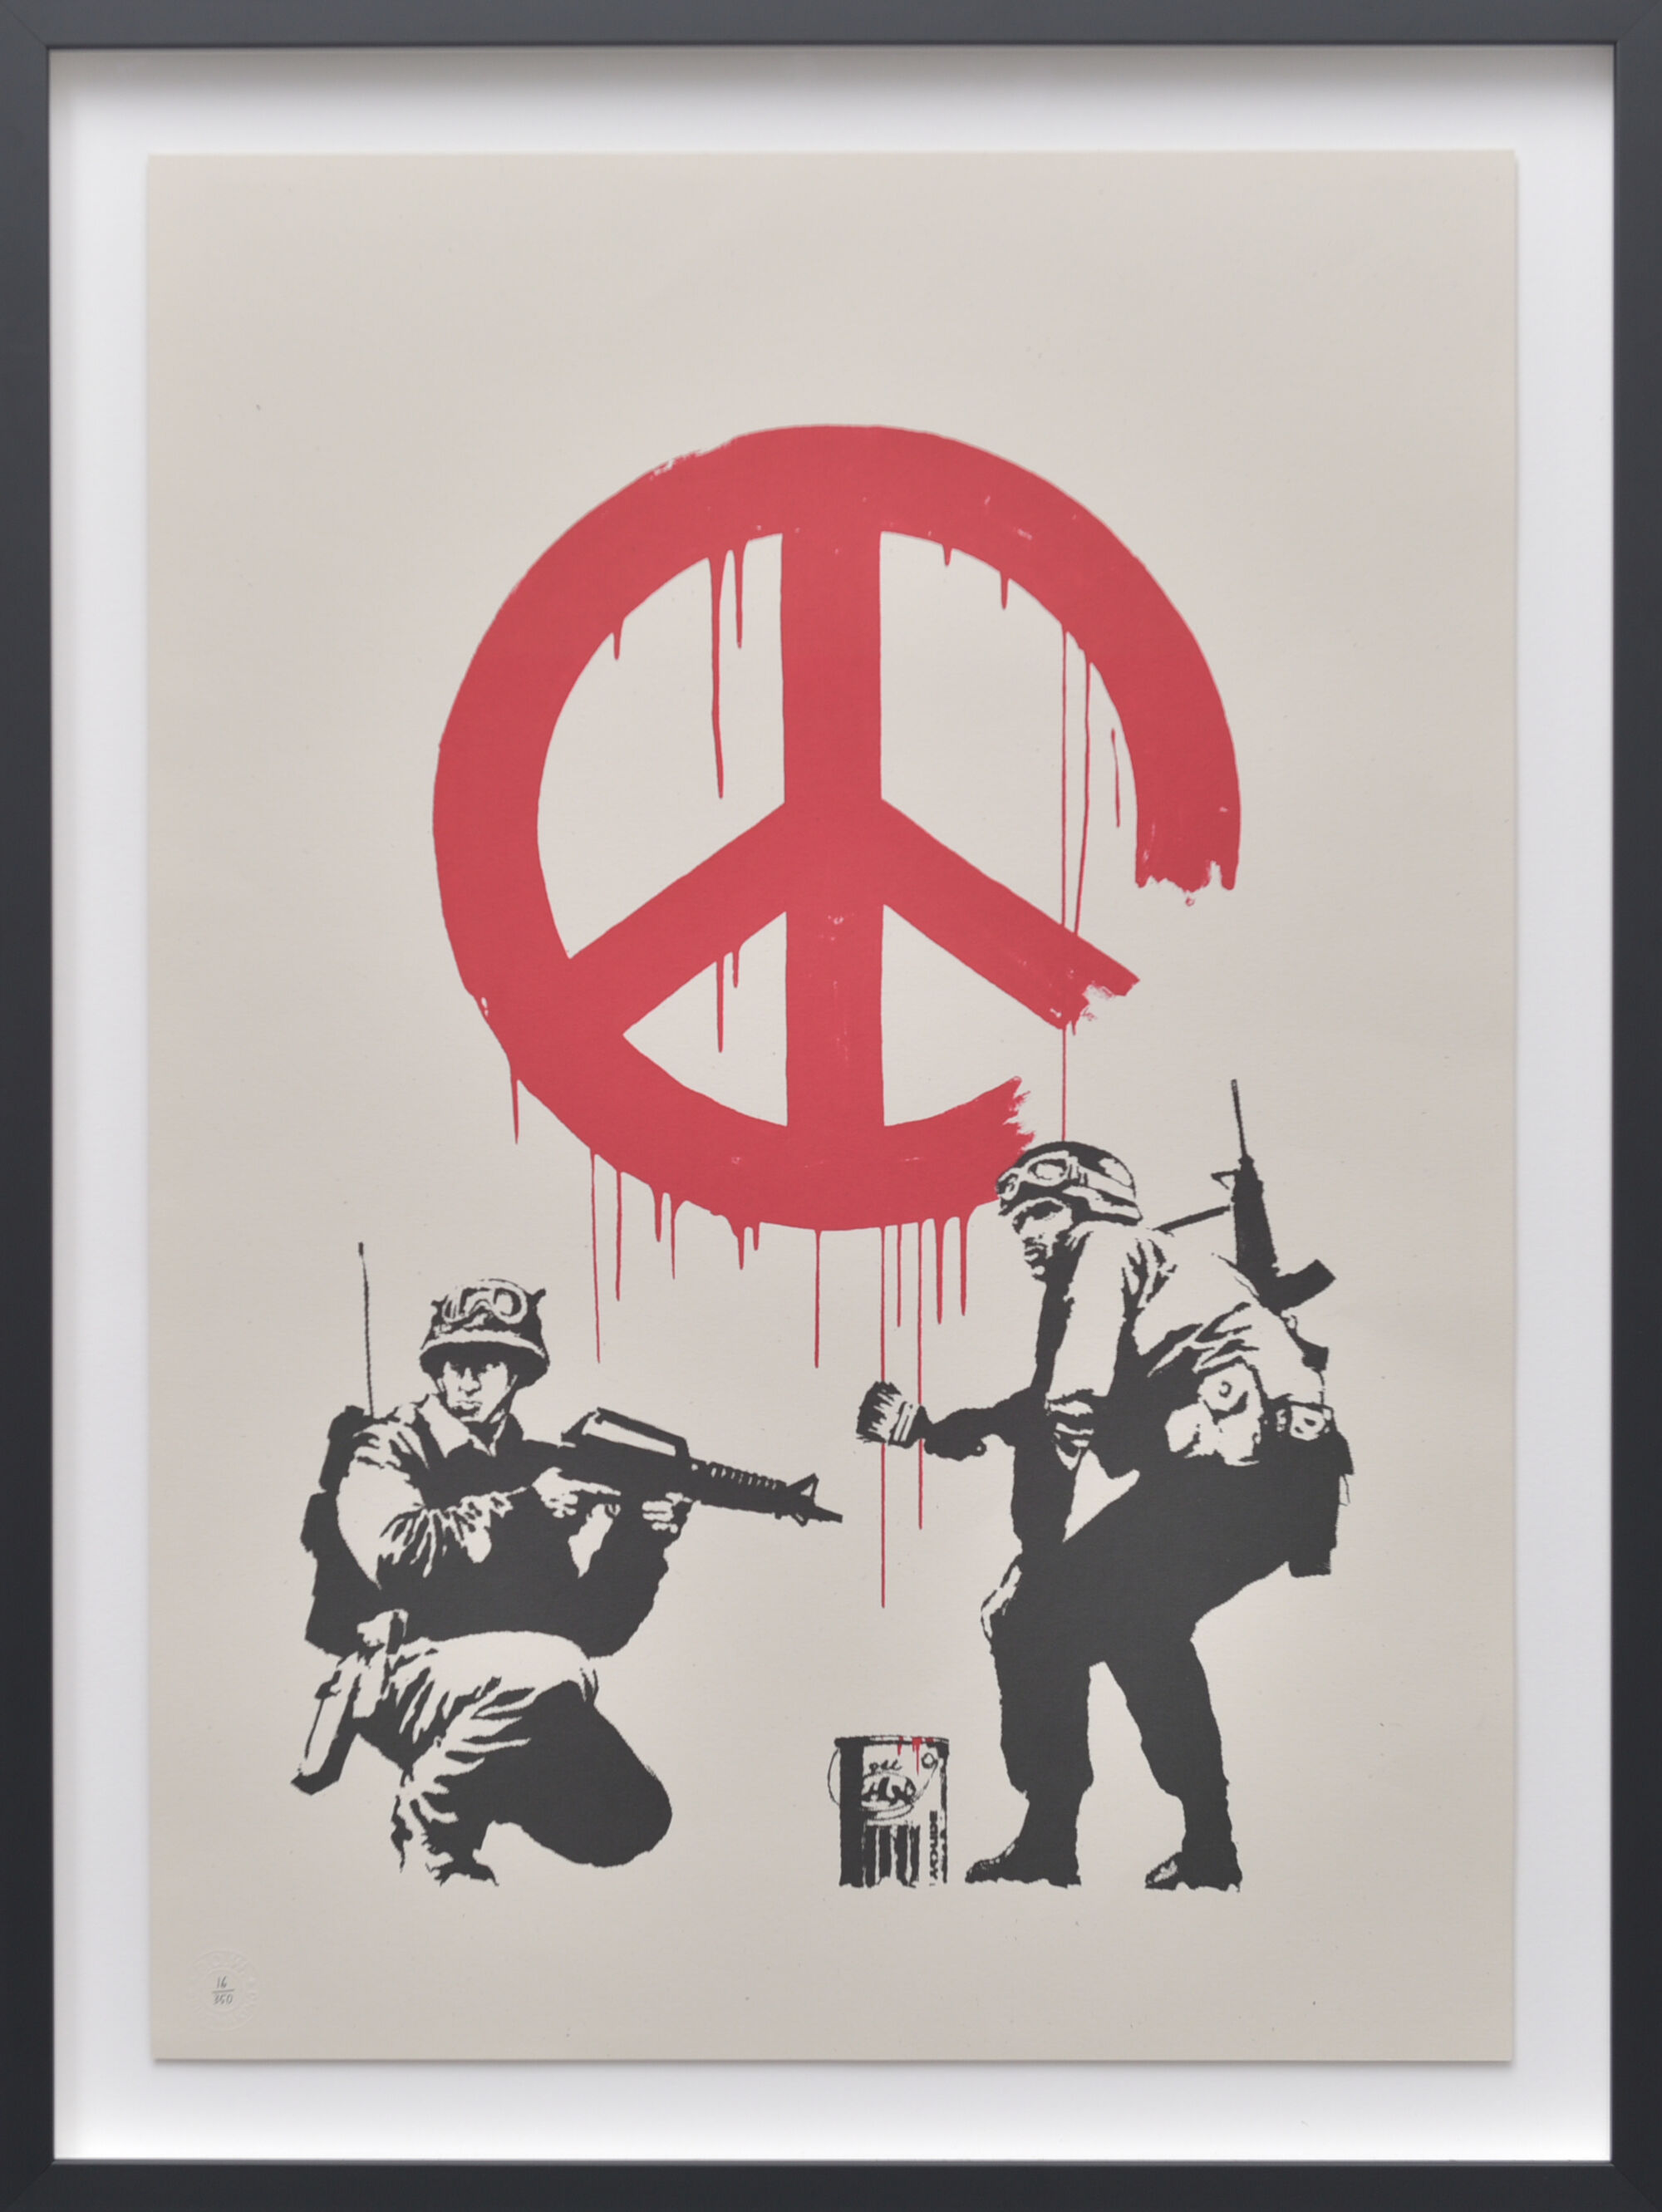 The Wick - Banksy, CND Soliders, 2005